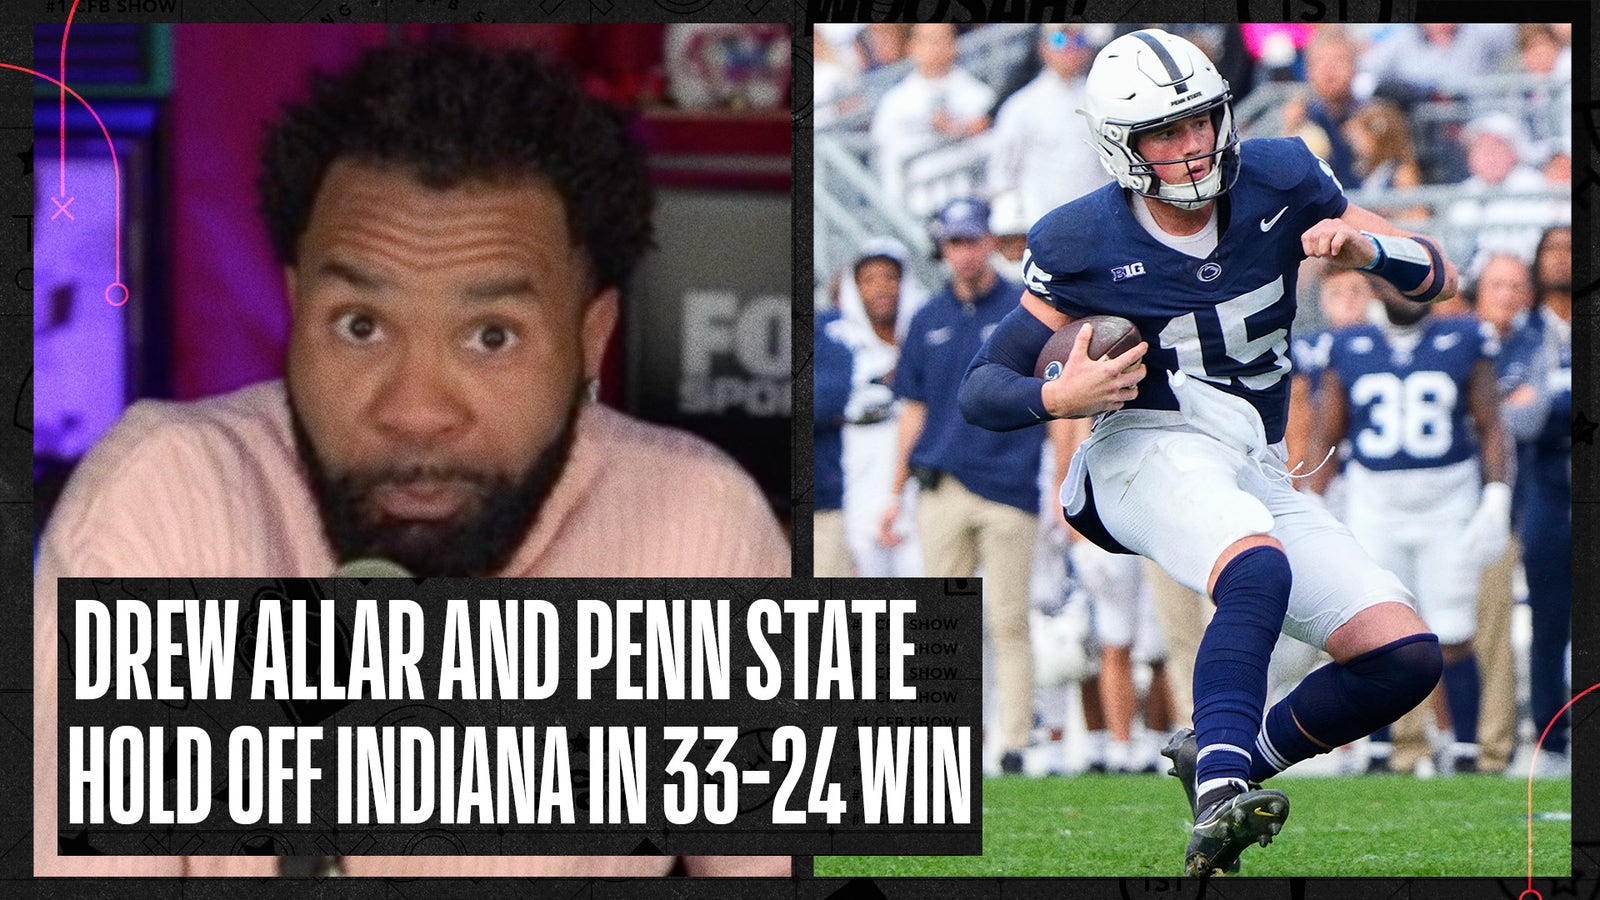 Drew Allar comes up big for Penn State vs. Indiana